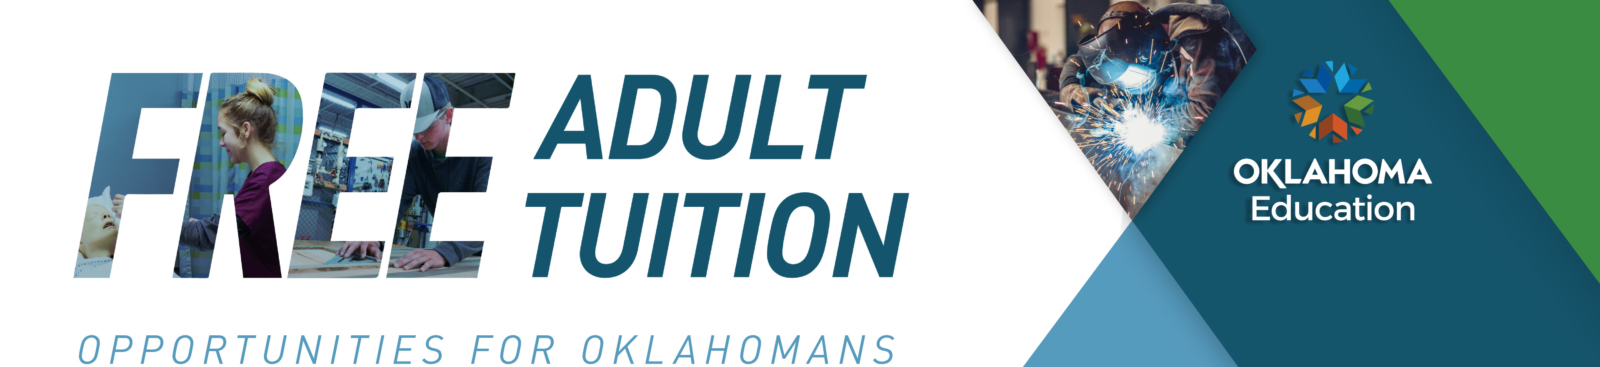 Free adult tuition banner